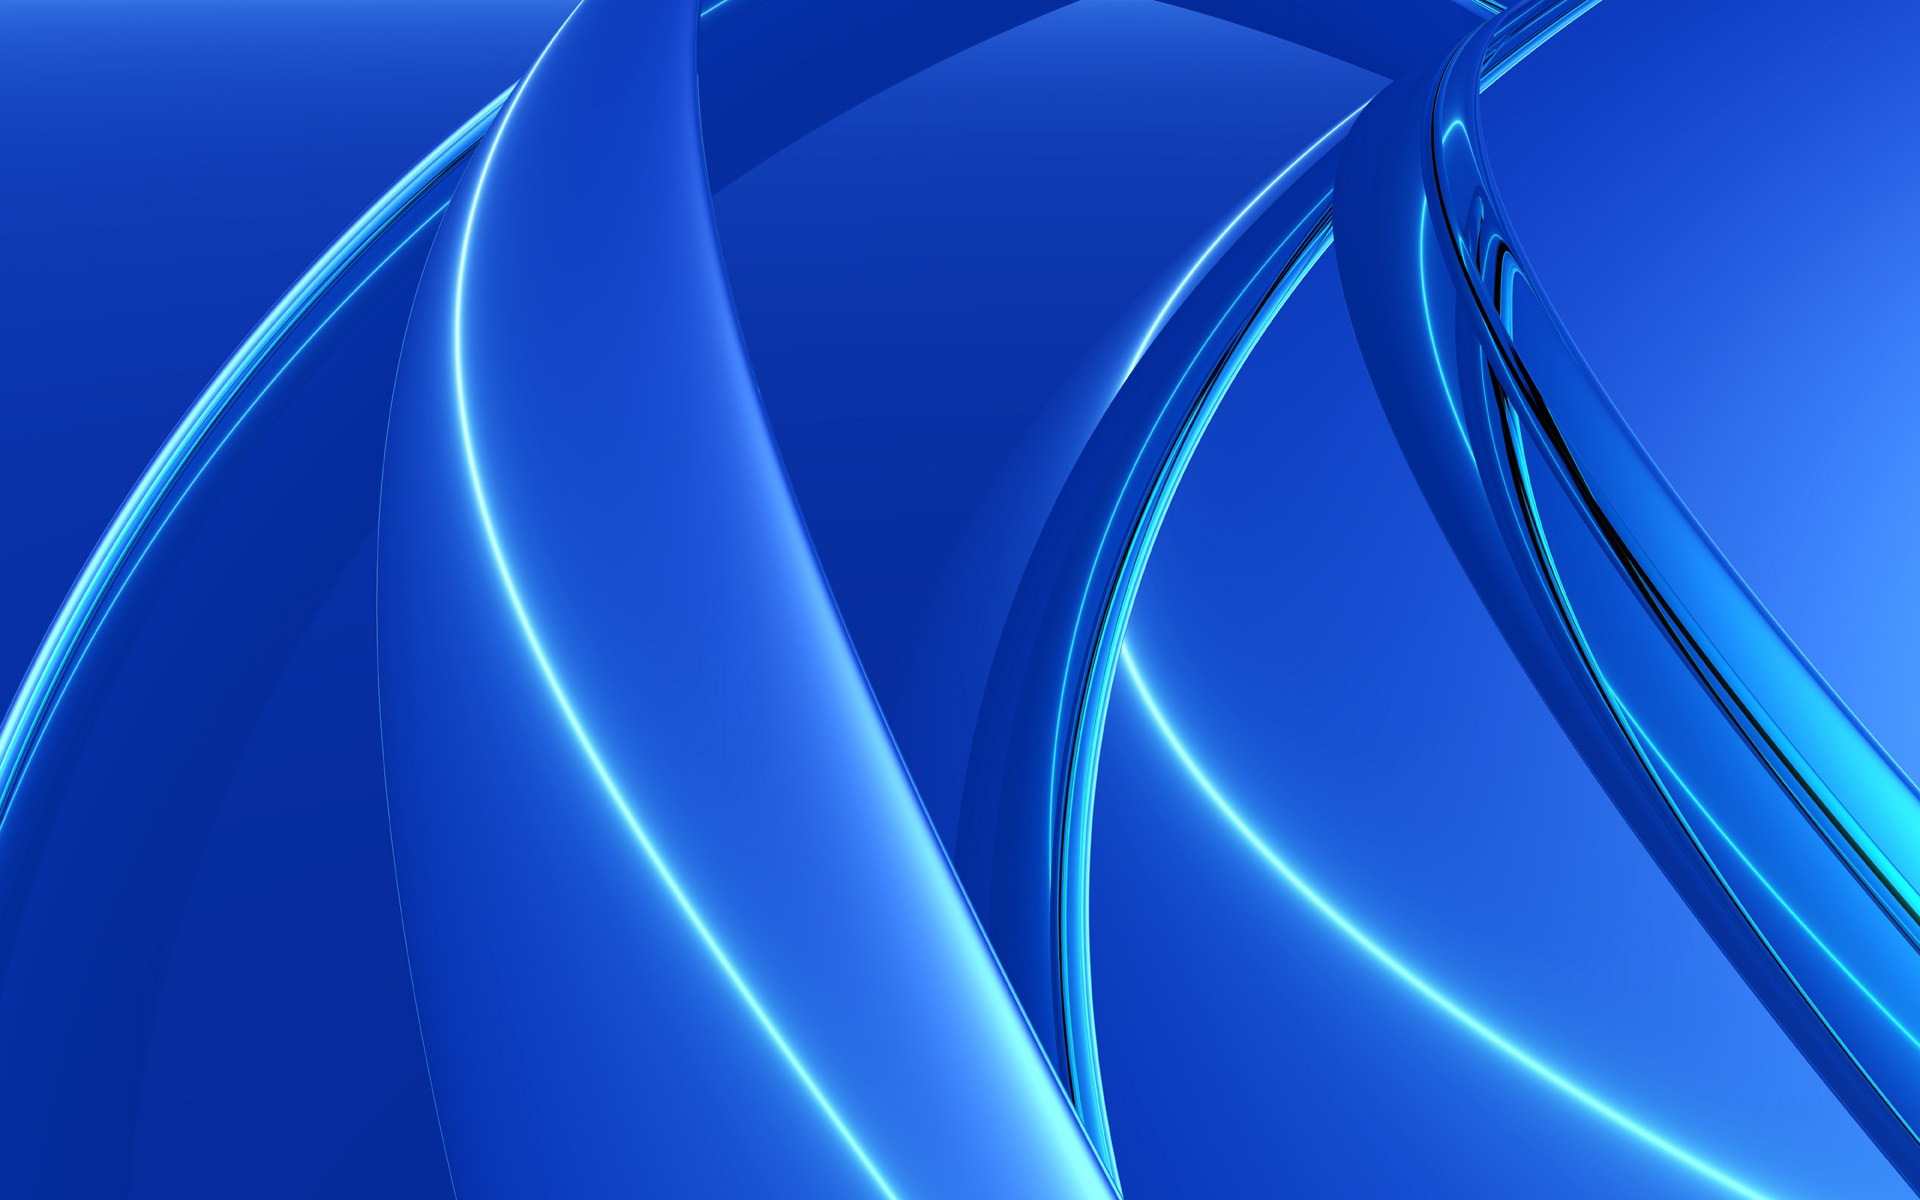 Cool Blue Abstract Wallpaper photos of blue abstract hd wallpapers by